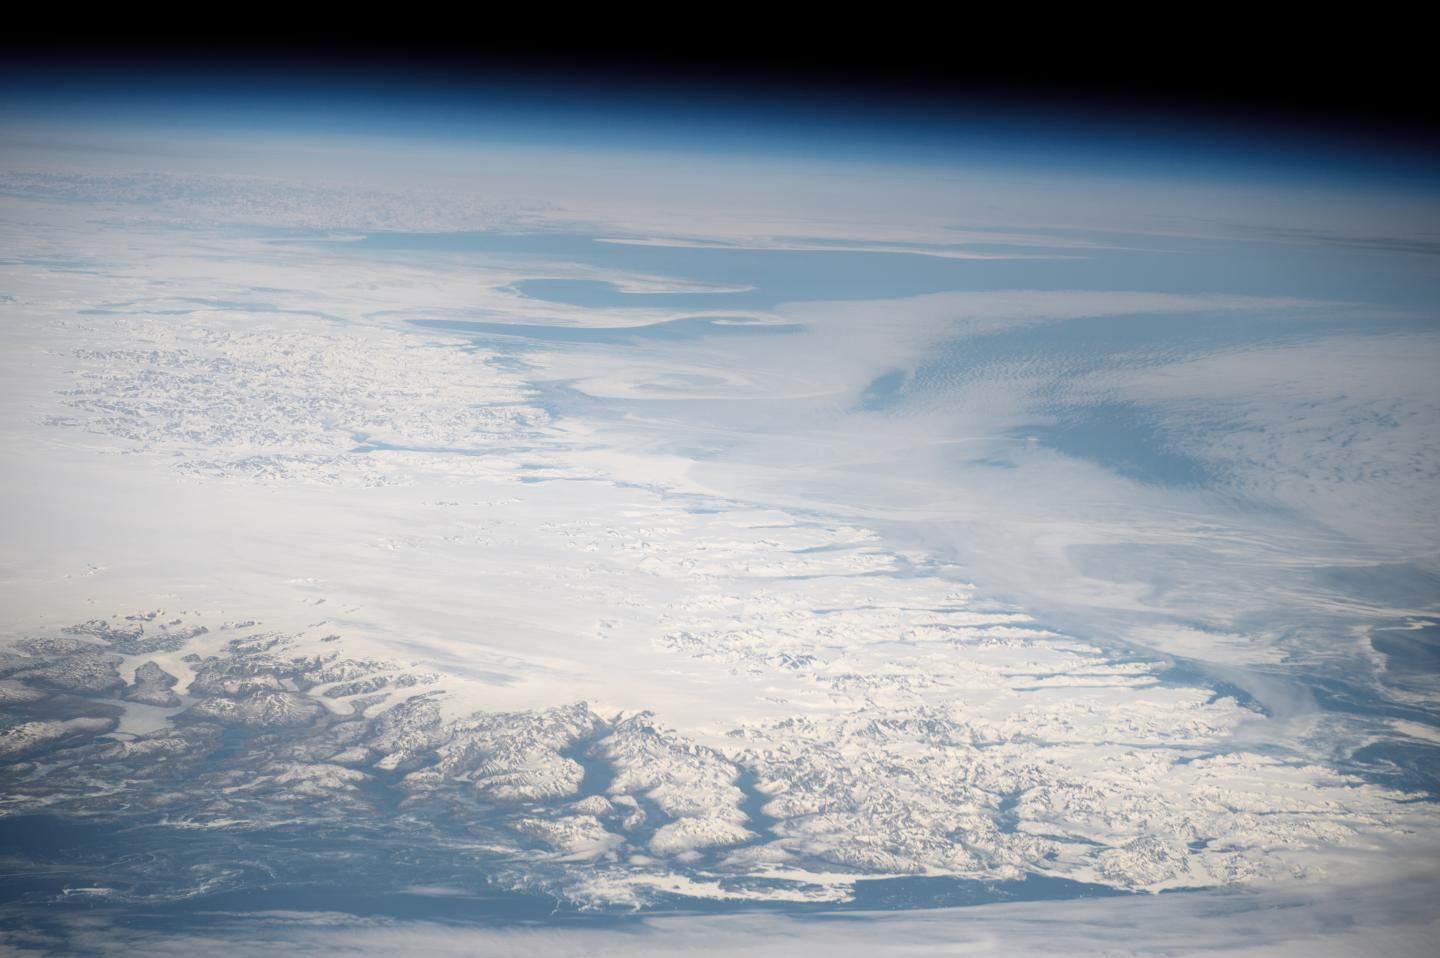 Southern Tip of Greenland from Space